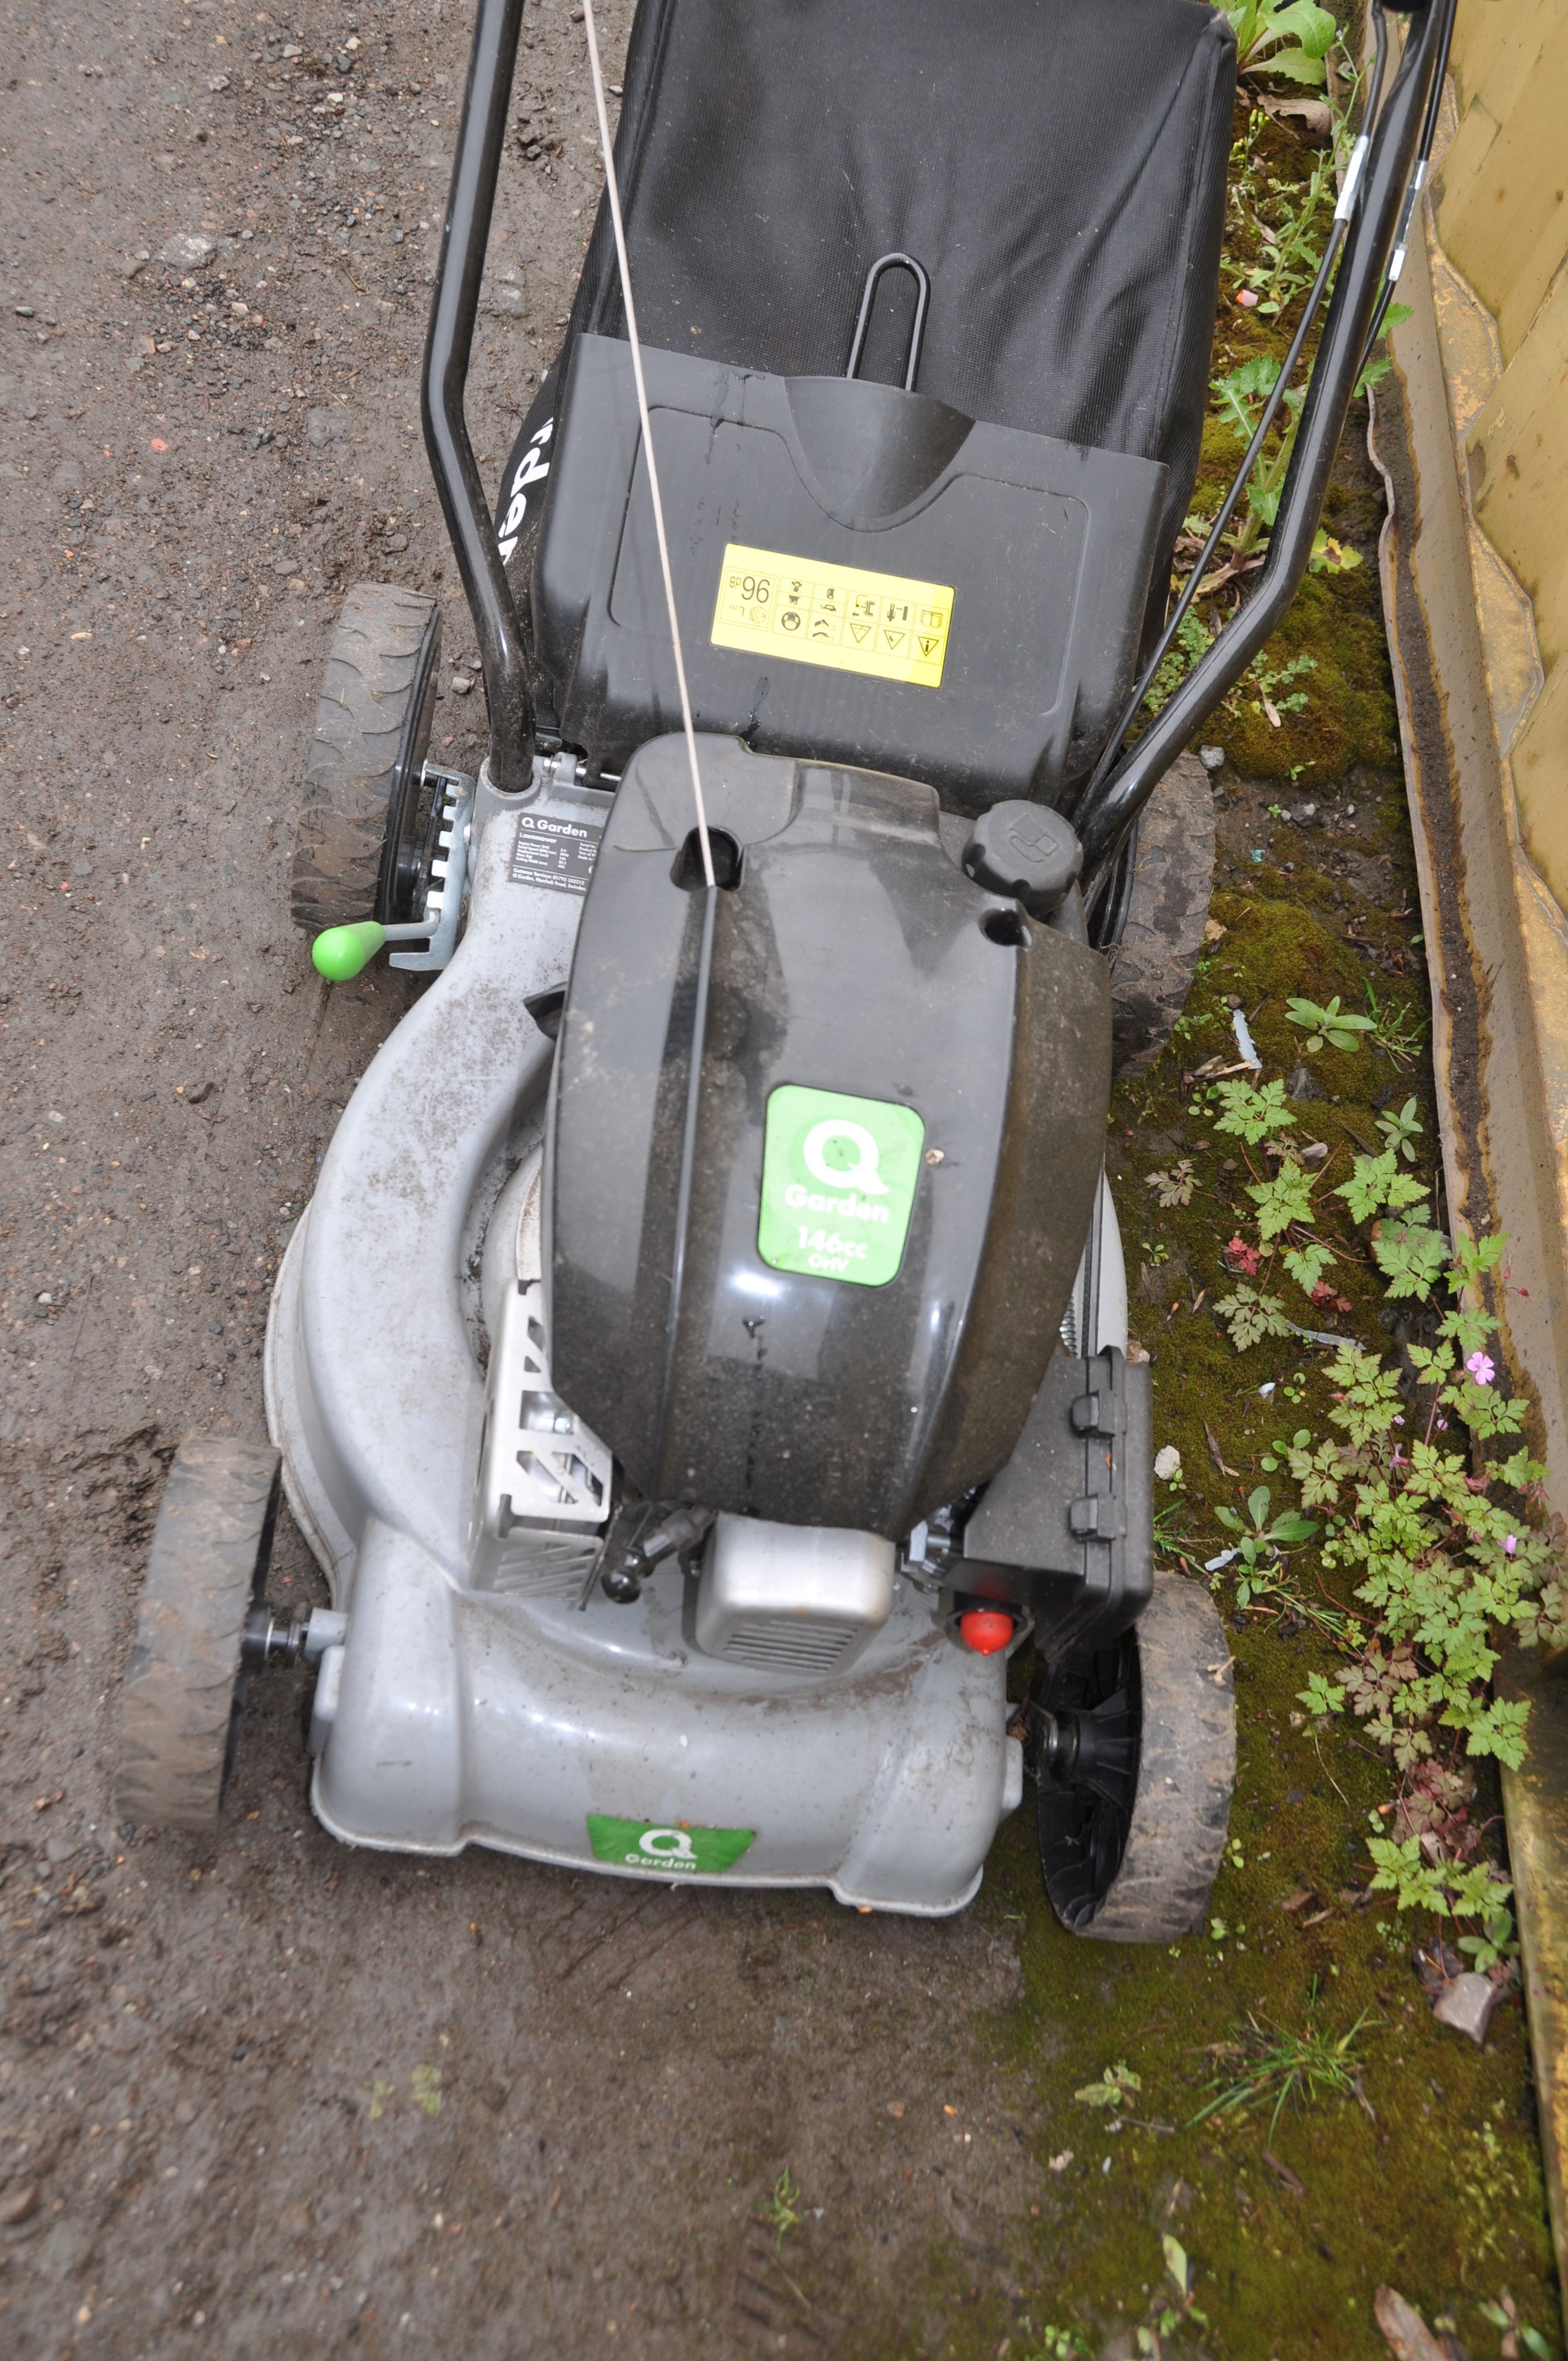 A Q GARDEN QG40-145SP SELF PROPELLED PETROL LAWN MOWER with collection box (engine pulls and - Image 2 of 2